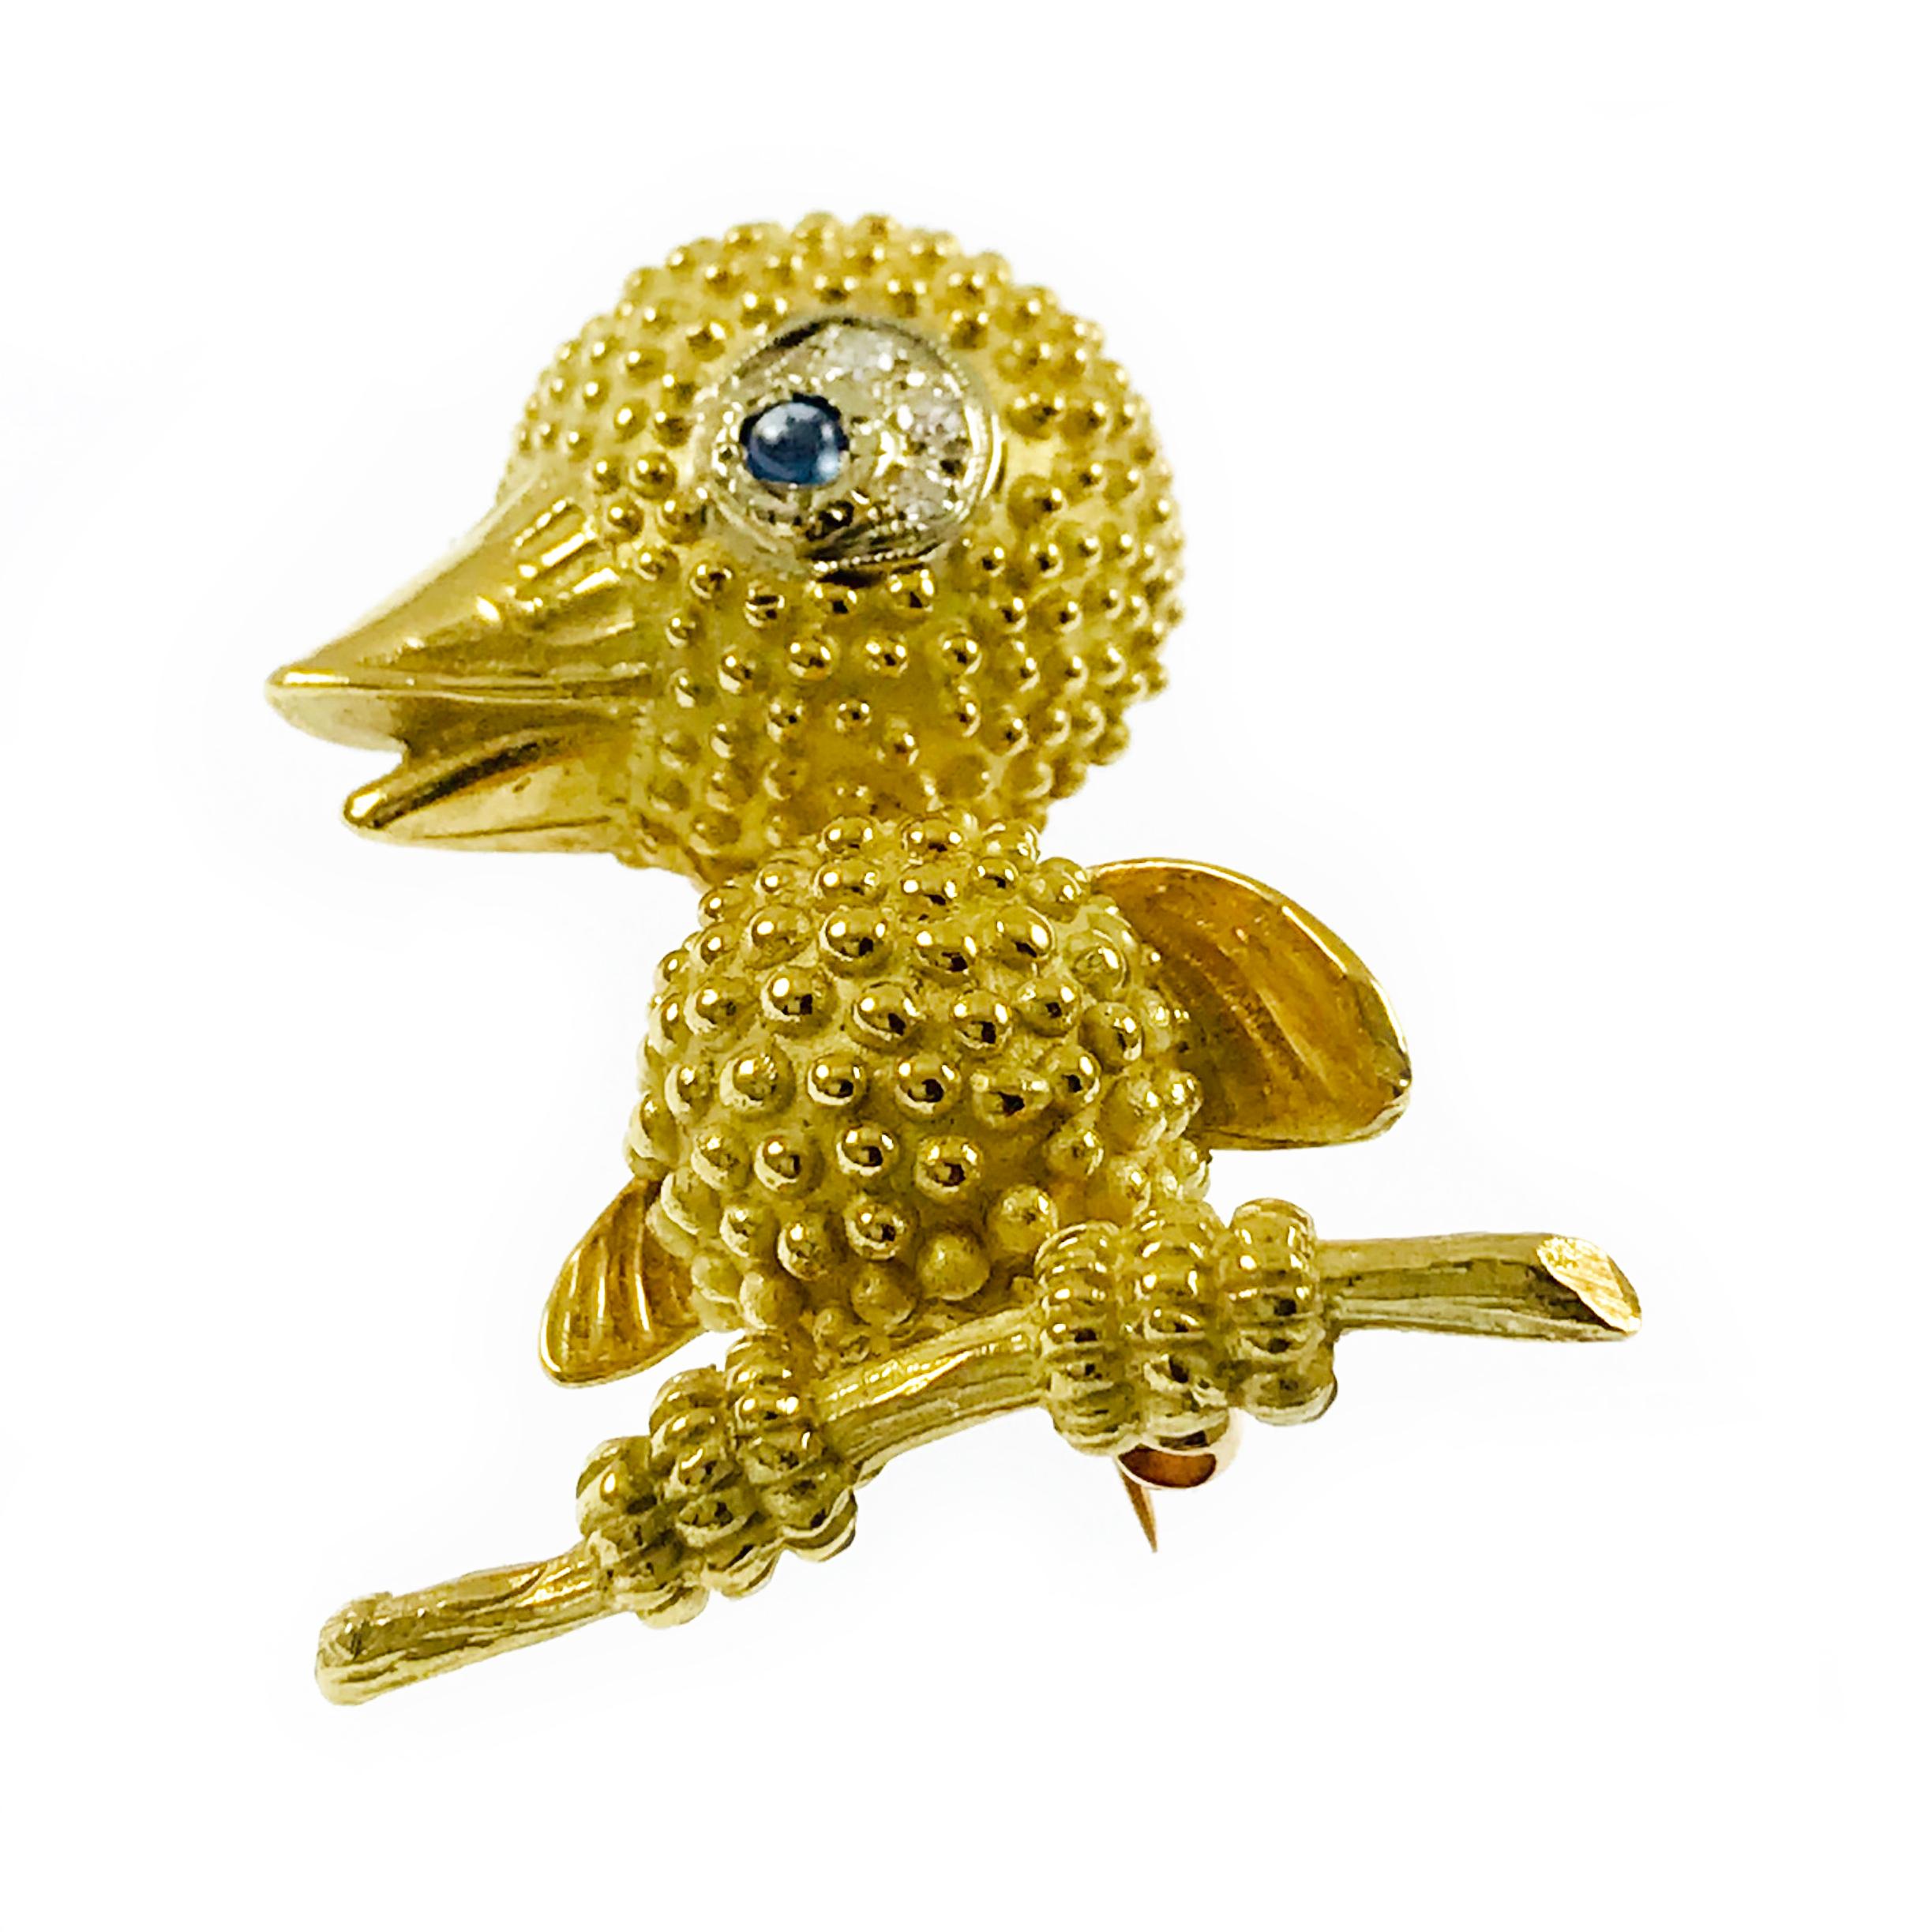 18k Yellow Gold Diamond Sapphire Brooch. This sweet little baby bird will capture your heart, significantly textured body, wings, feet and branch. The eye has a milgrain outline and three round 1.56mm single-cut diamonds set in white gold with a